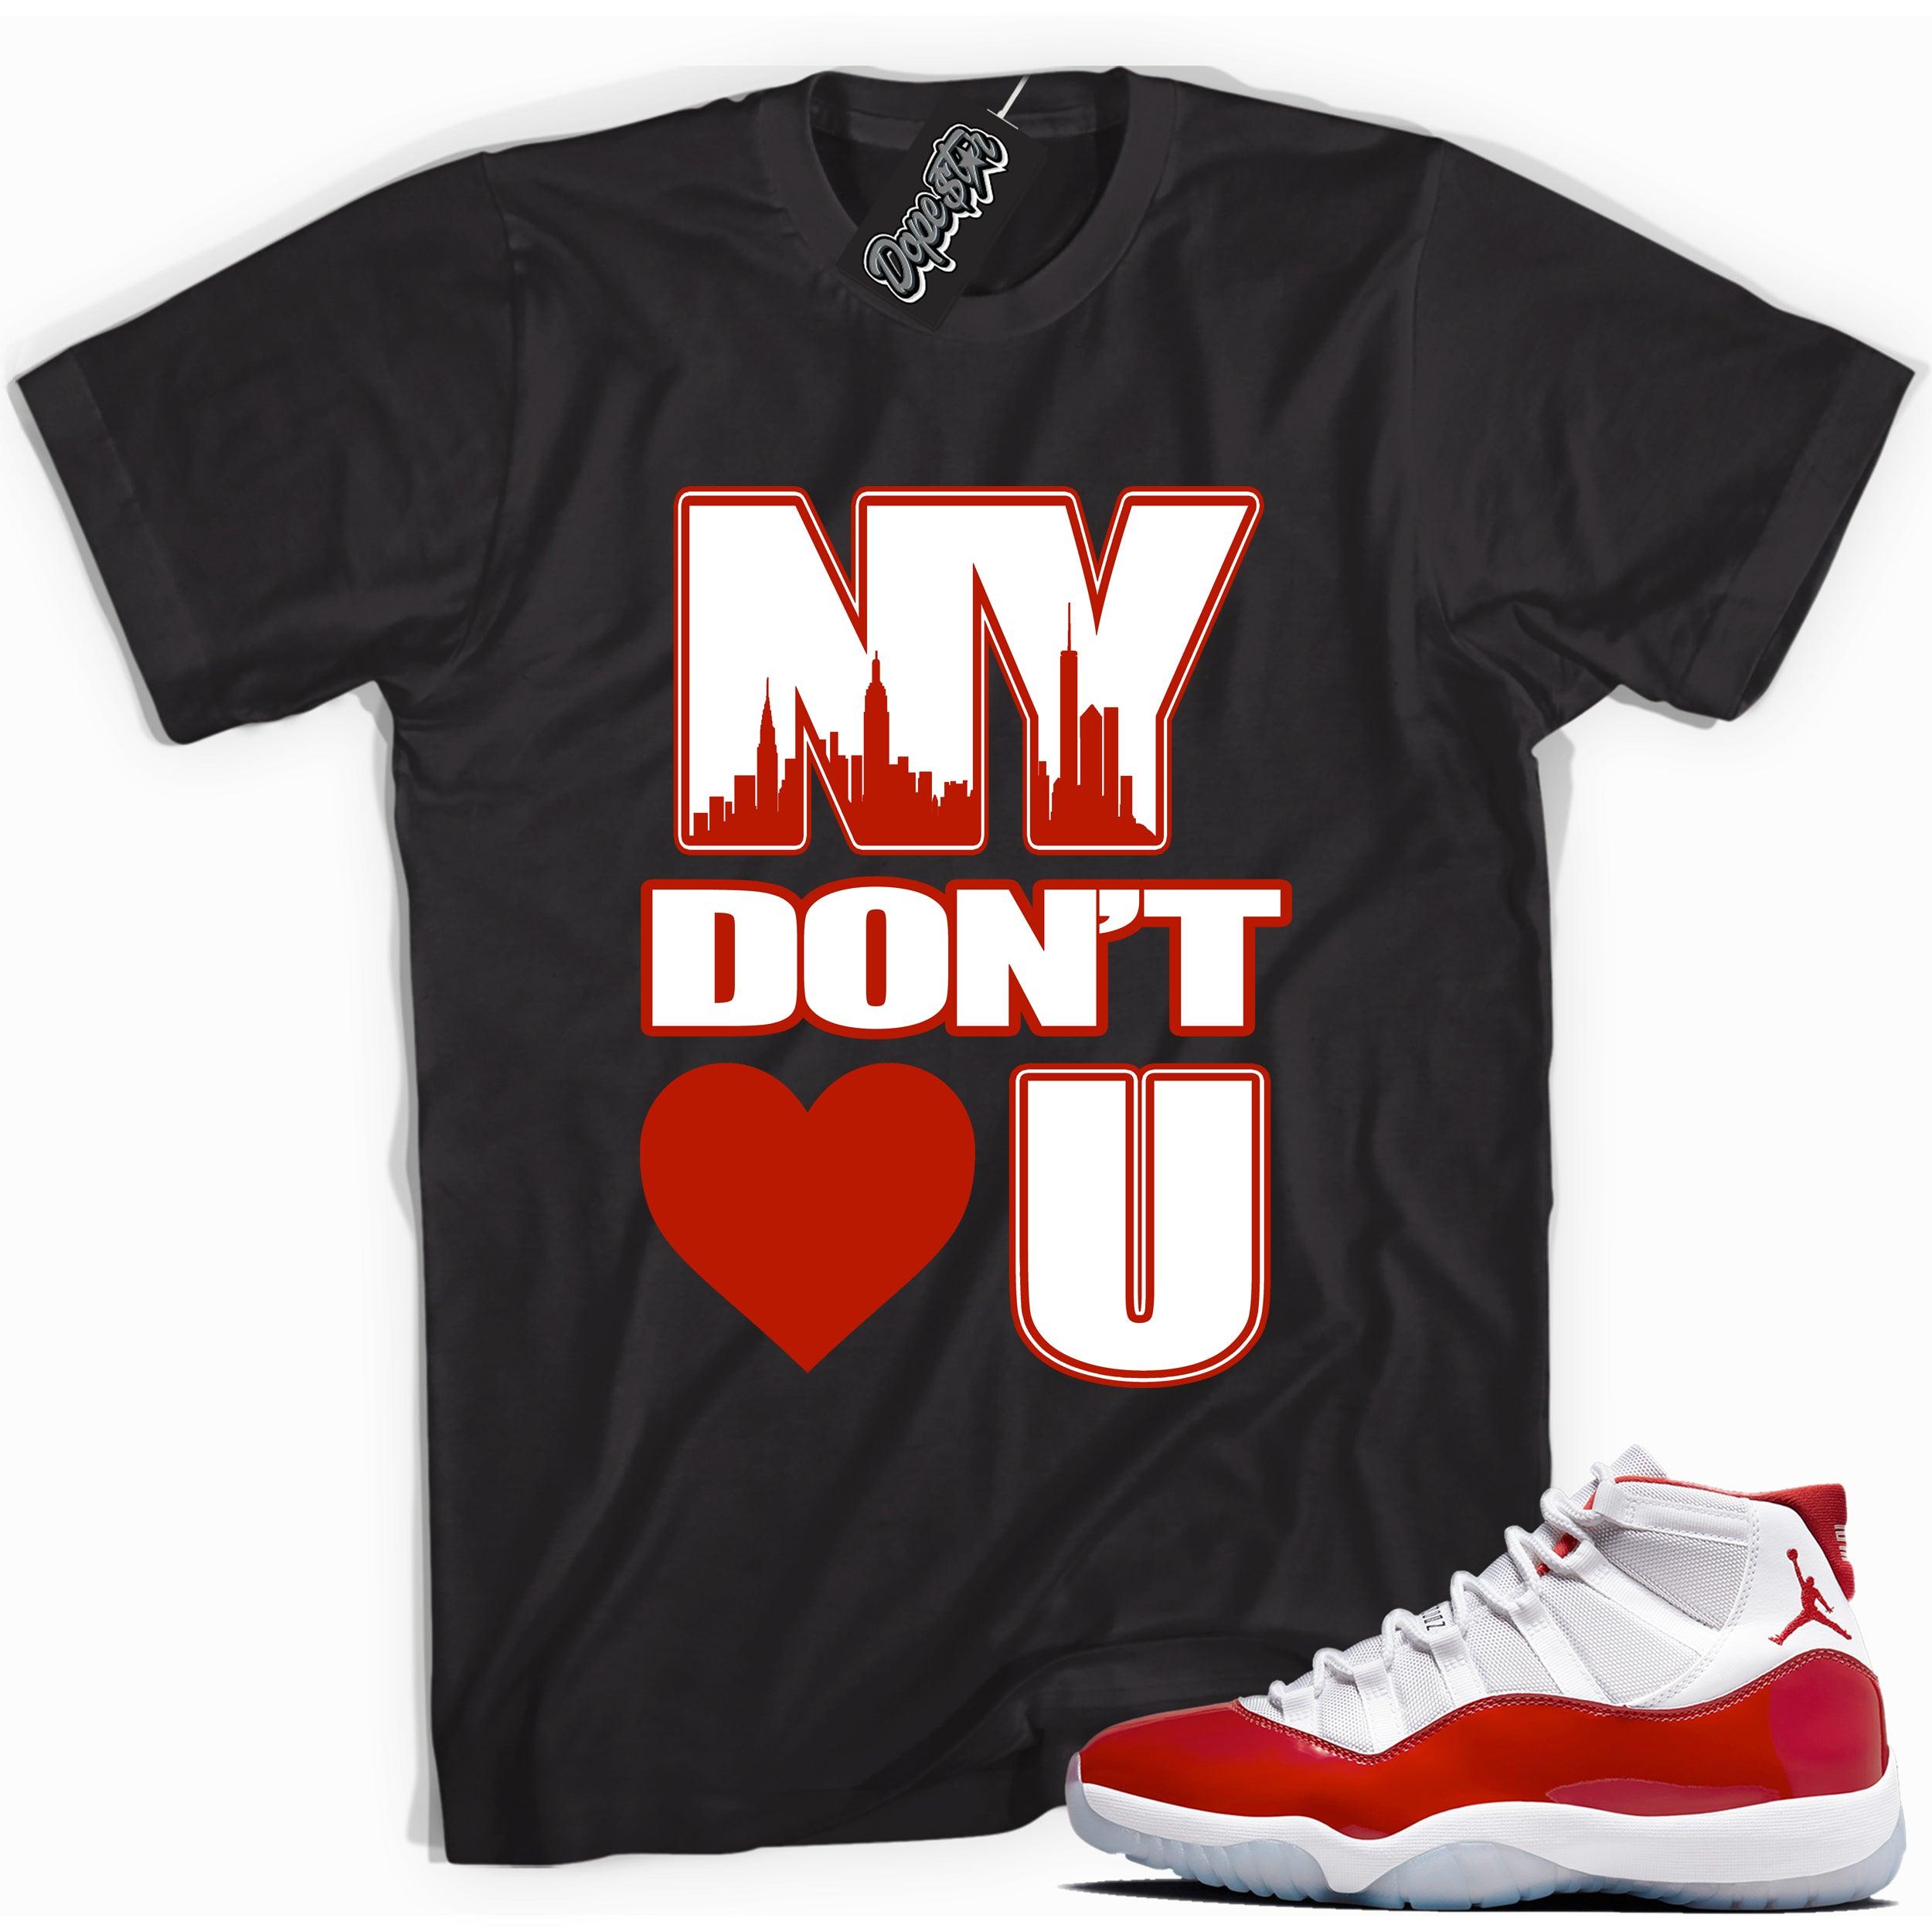 Cool Black graphic tee with “ NY Don’t Love U ” print, that perfectly matches Air Jordan 11 Cherry sneakers 